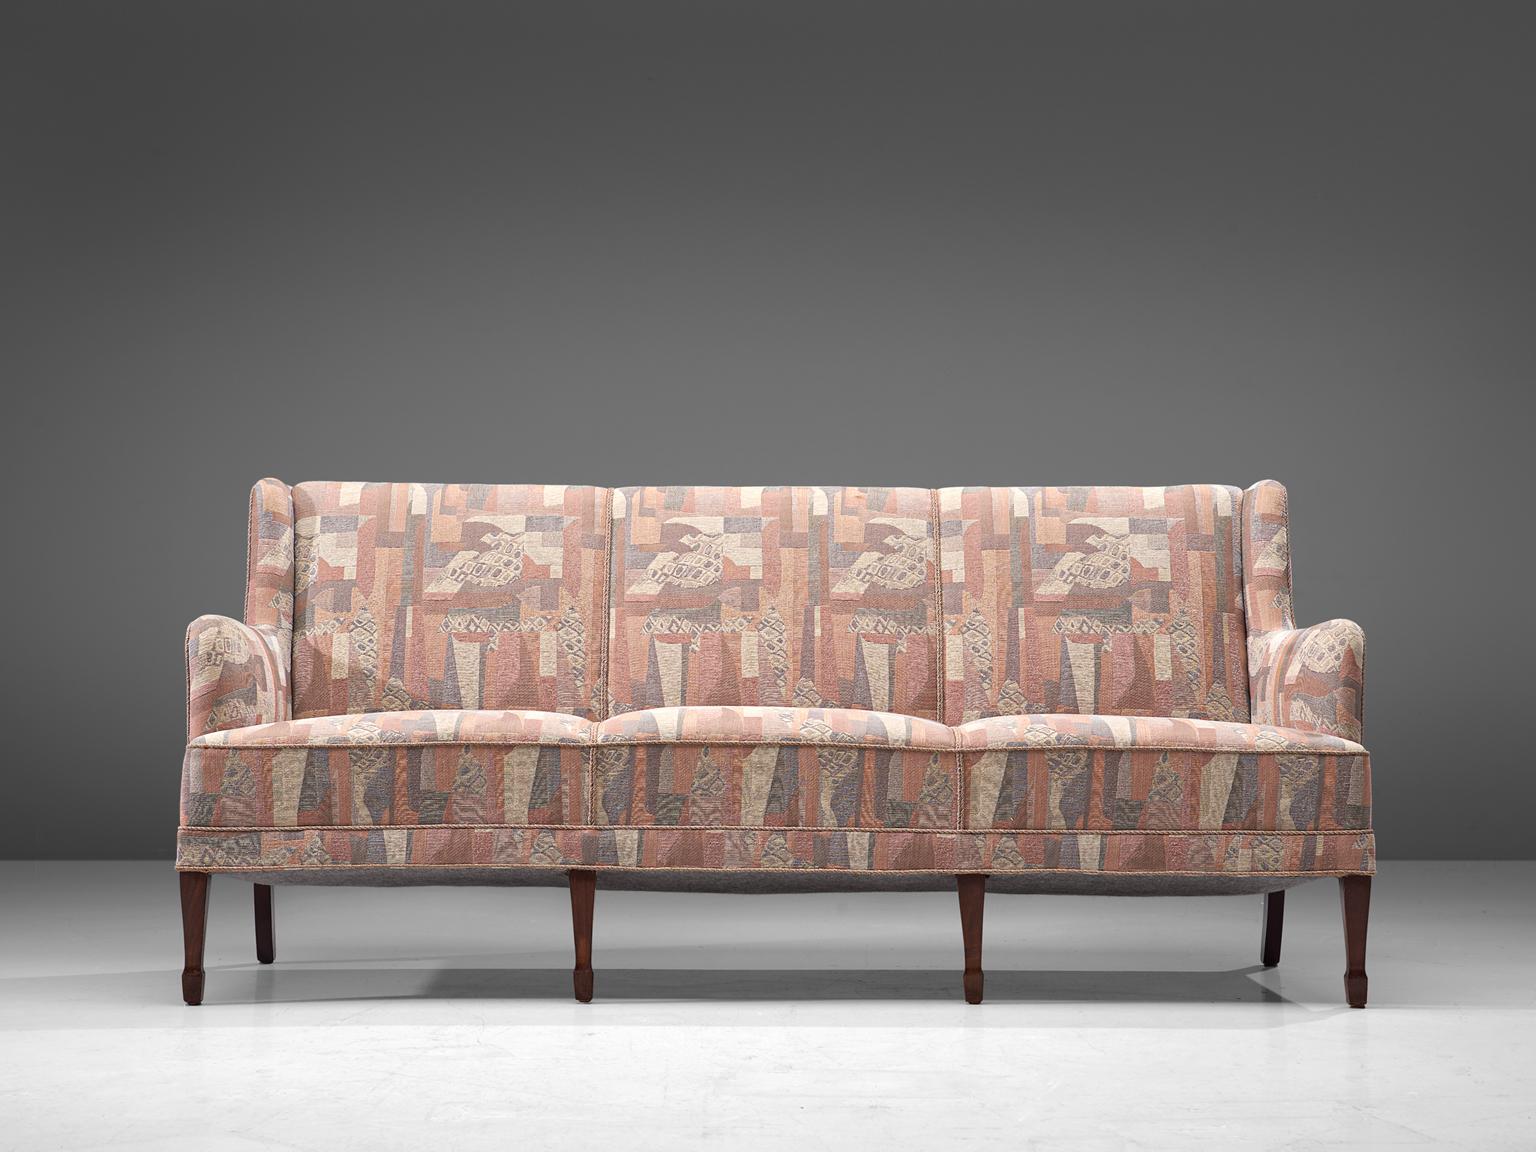 Frits Henningsen, three-seat sofa, fabric and oak, Denmark, 1940s. 

This elegant three-seat sofa is made by master cabinetmaker Frits Henningsen. This refined sofa is a classic pieces. The backrest holds small wings, which runs over into the